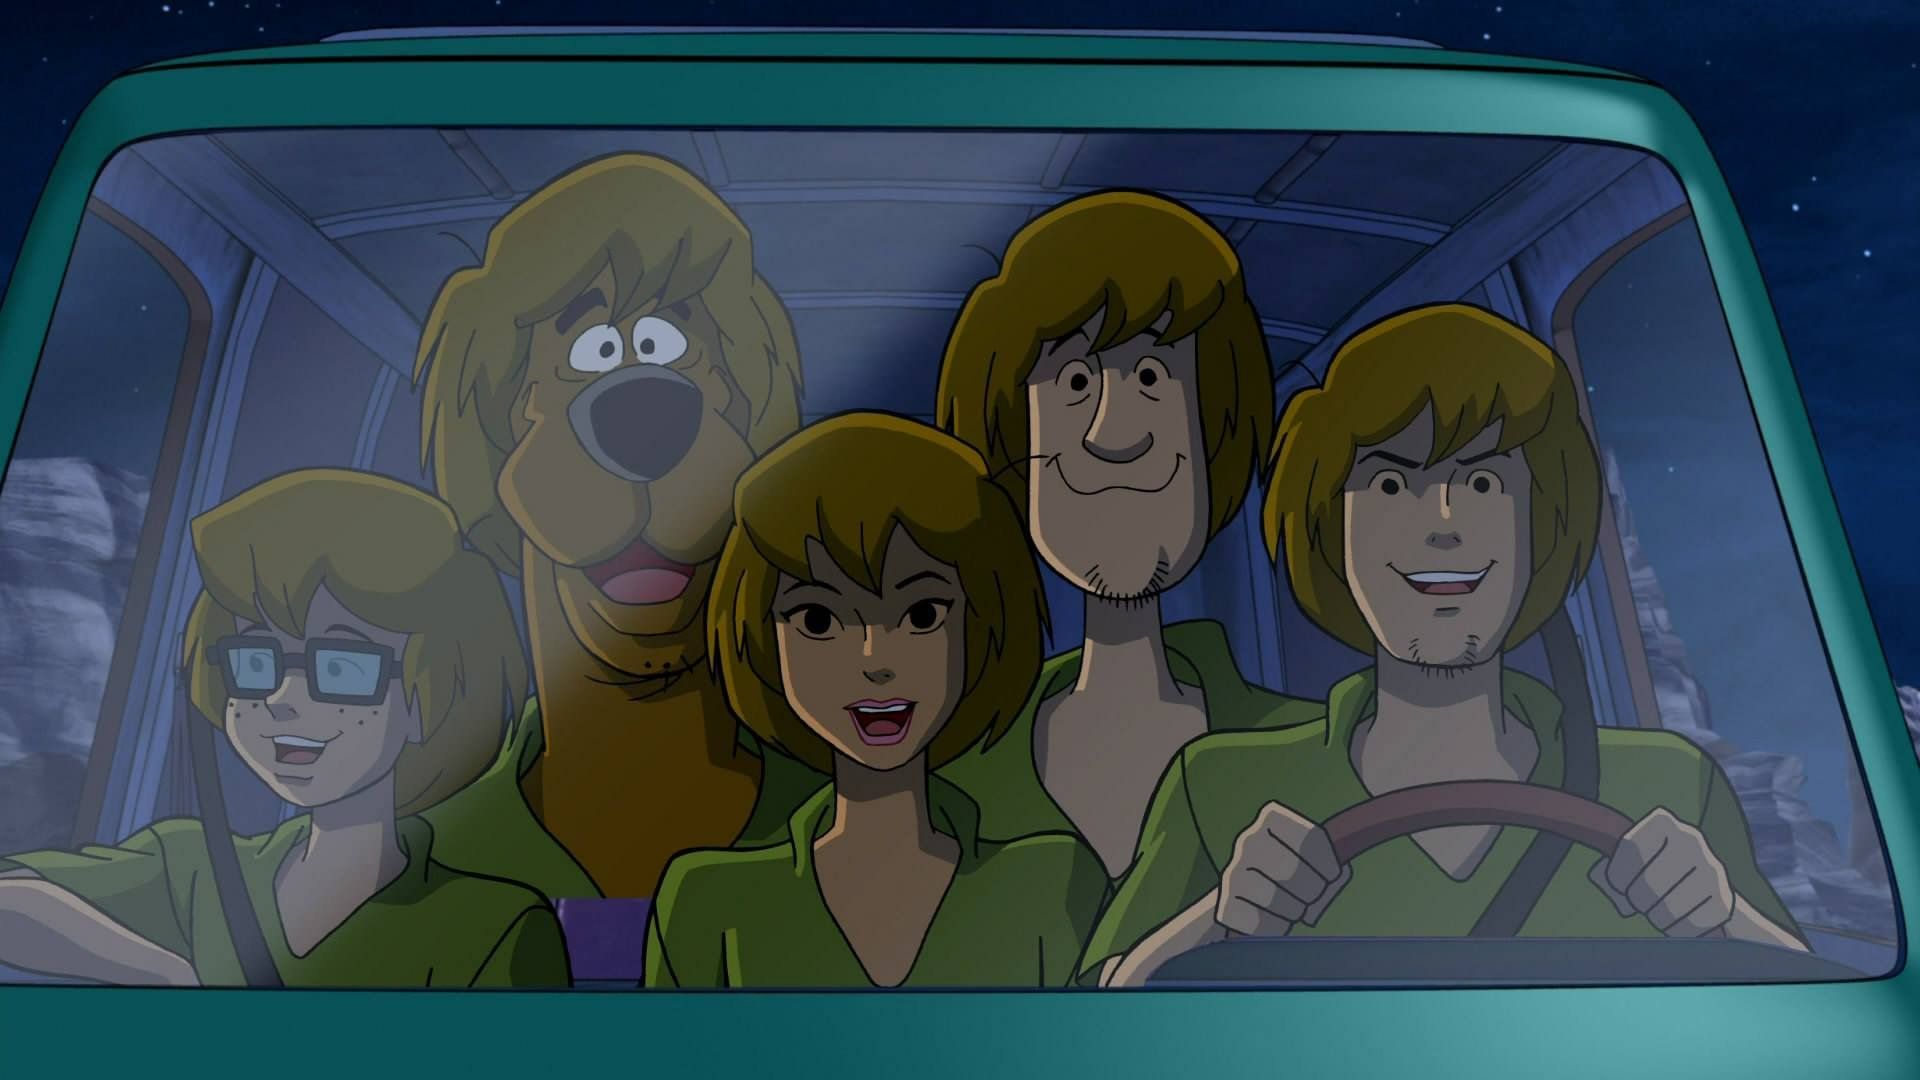 I was not prepared for Daphne. Shaggy's Power